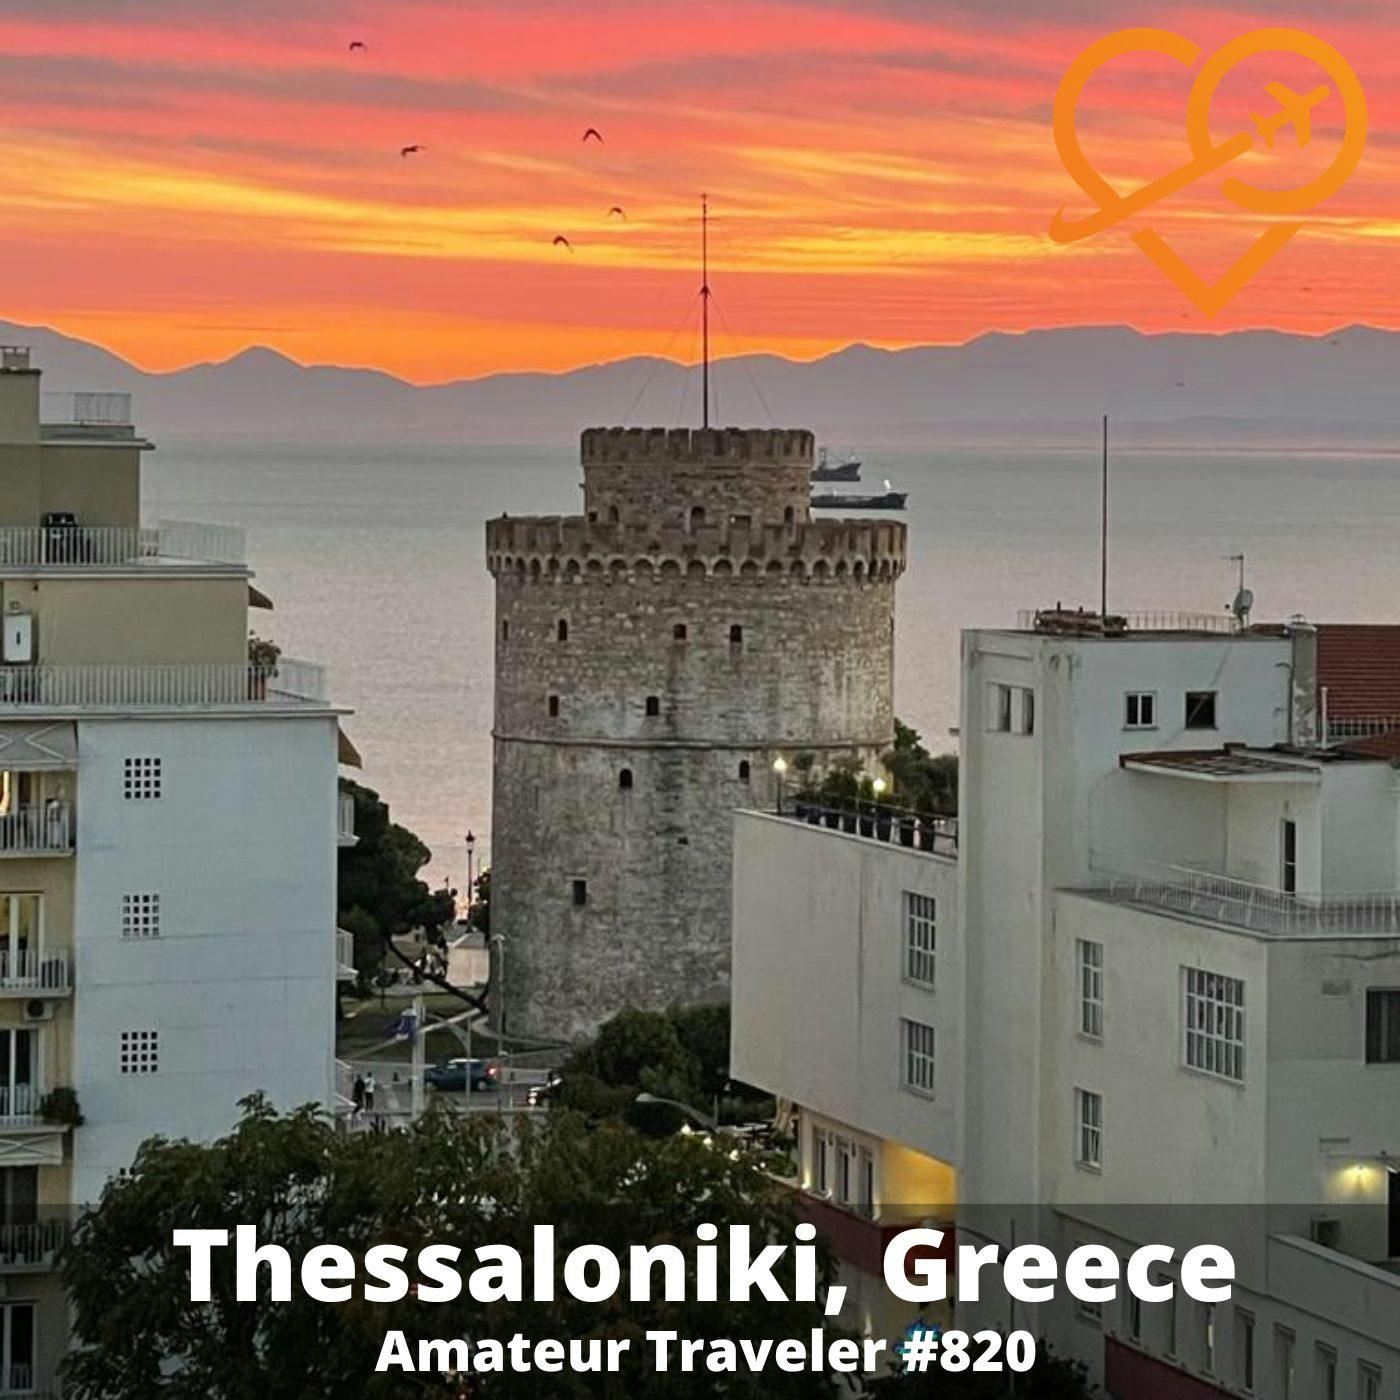 AT#820 - Travel to Thessaloniki, Greece